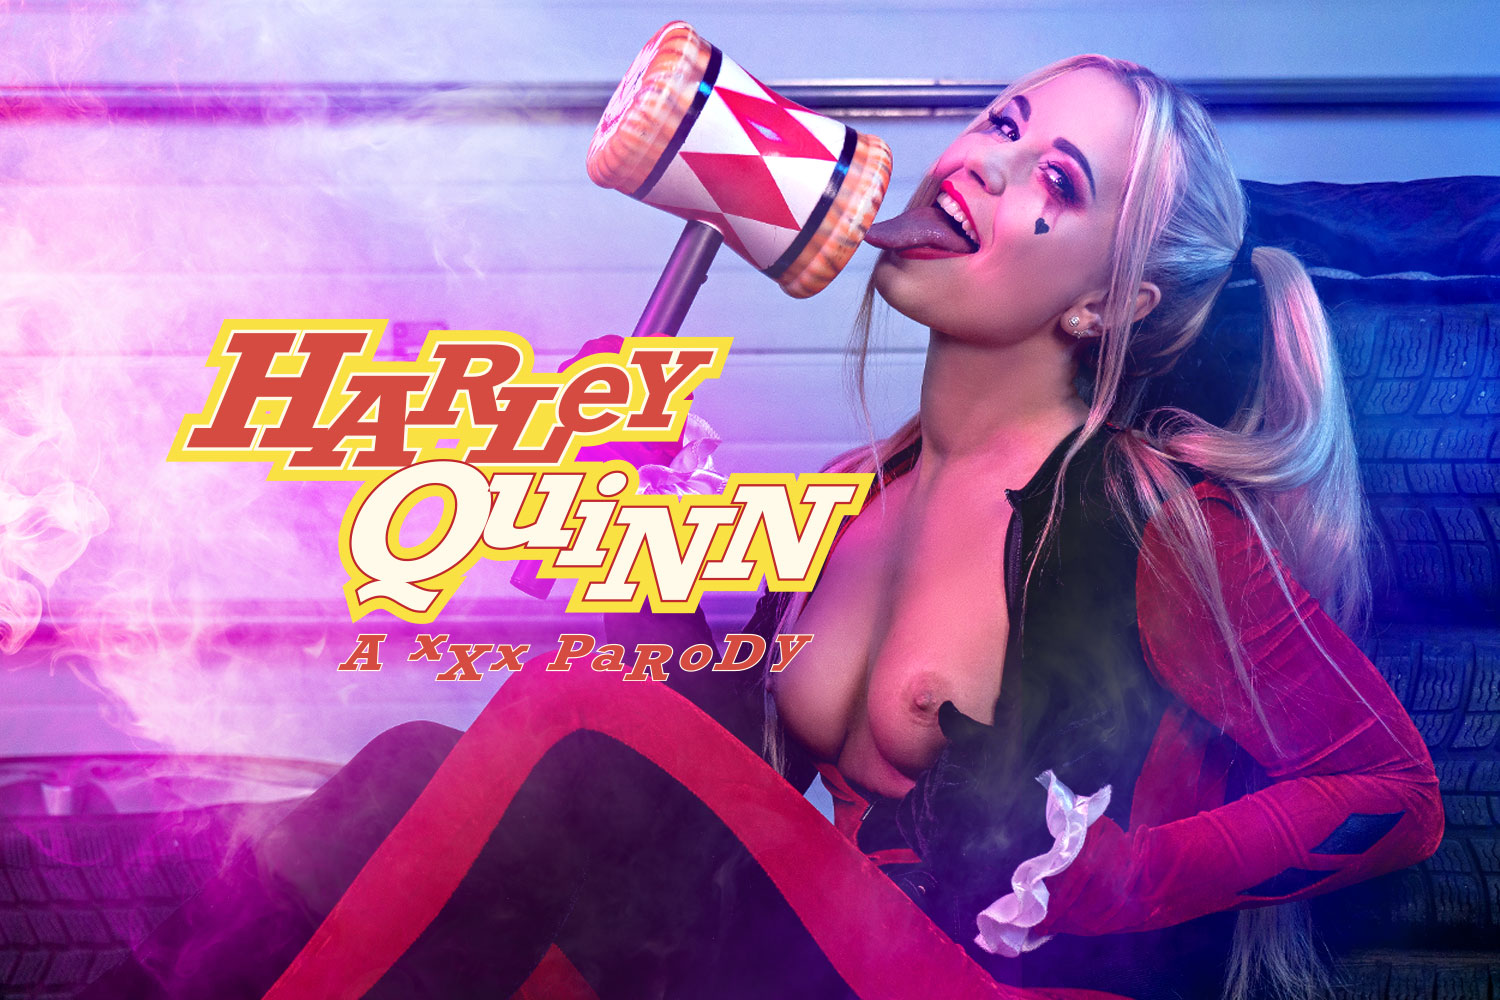 ashley nicole recommends Harley Quinn Vr Porn